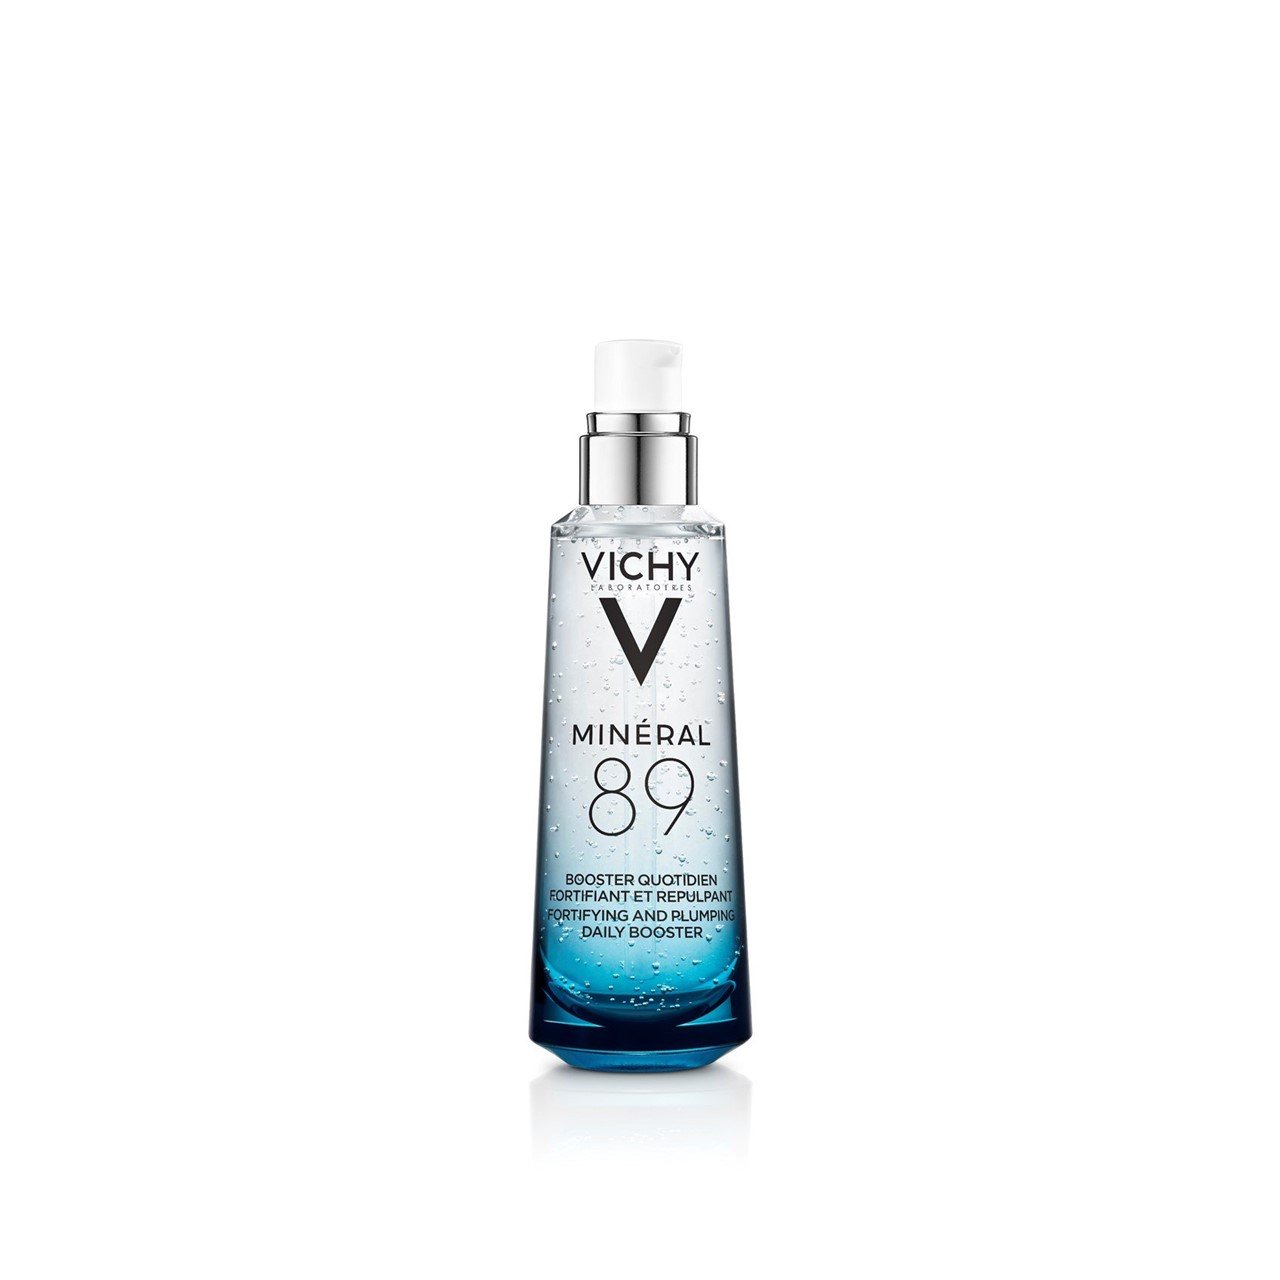 Vichy Minéral 89 Fortifying and Plumping Daily Booster 75ml (2.54fl oz)